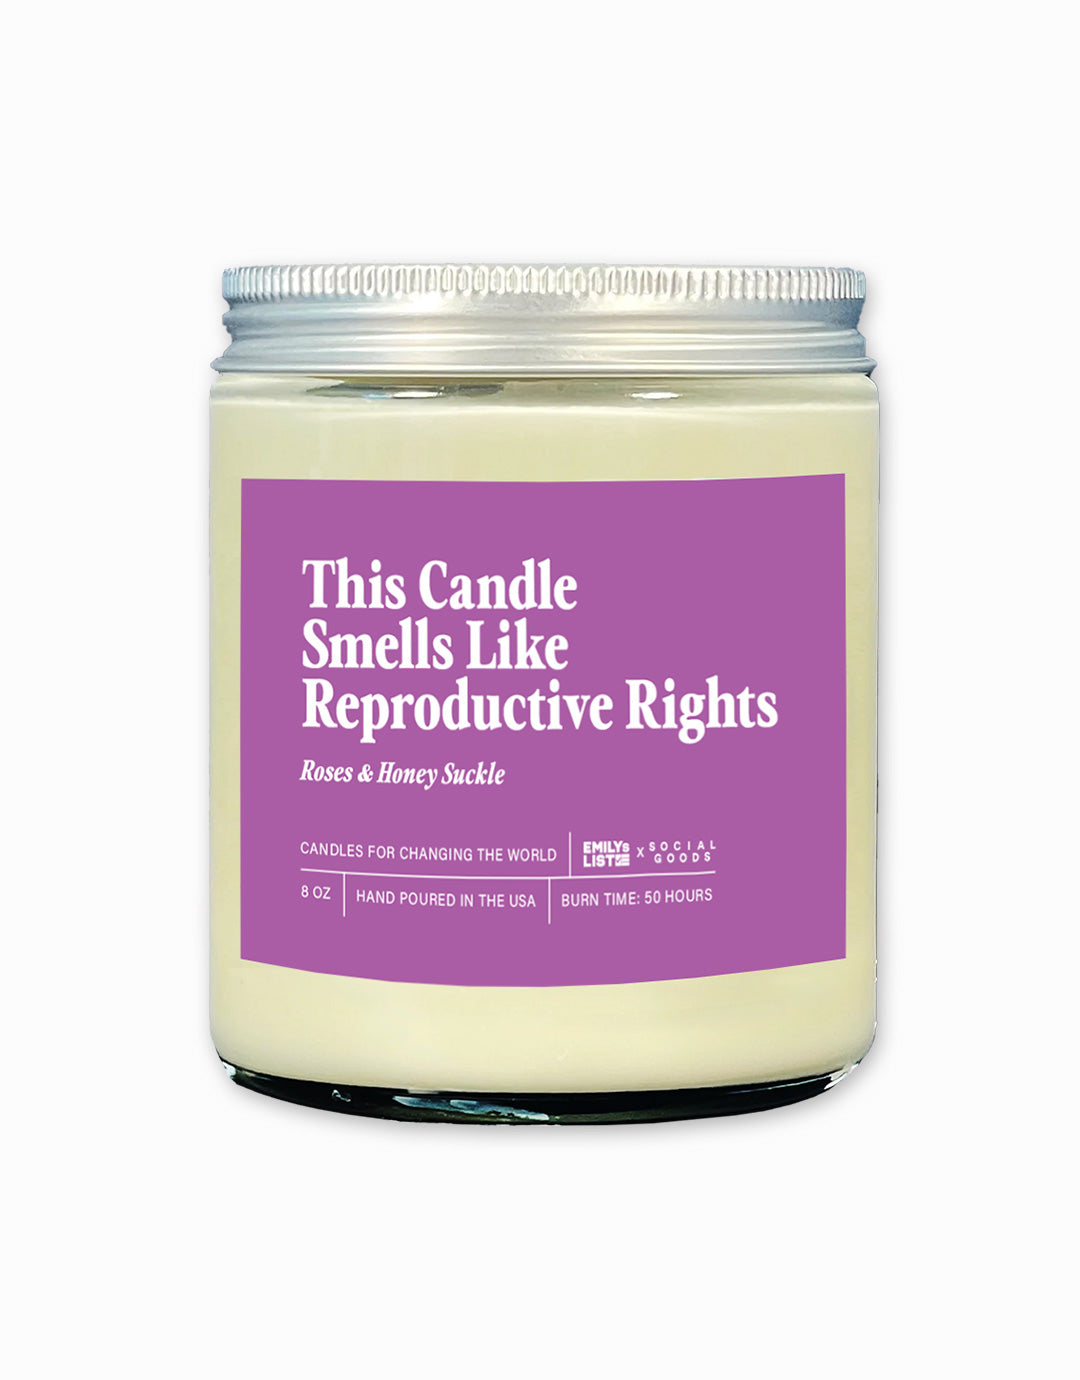 The Reproductive Rights Candle